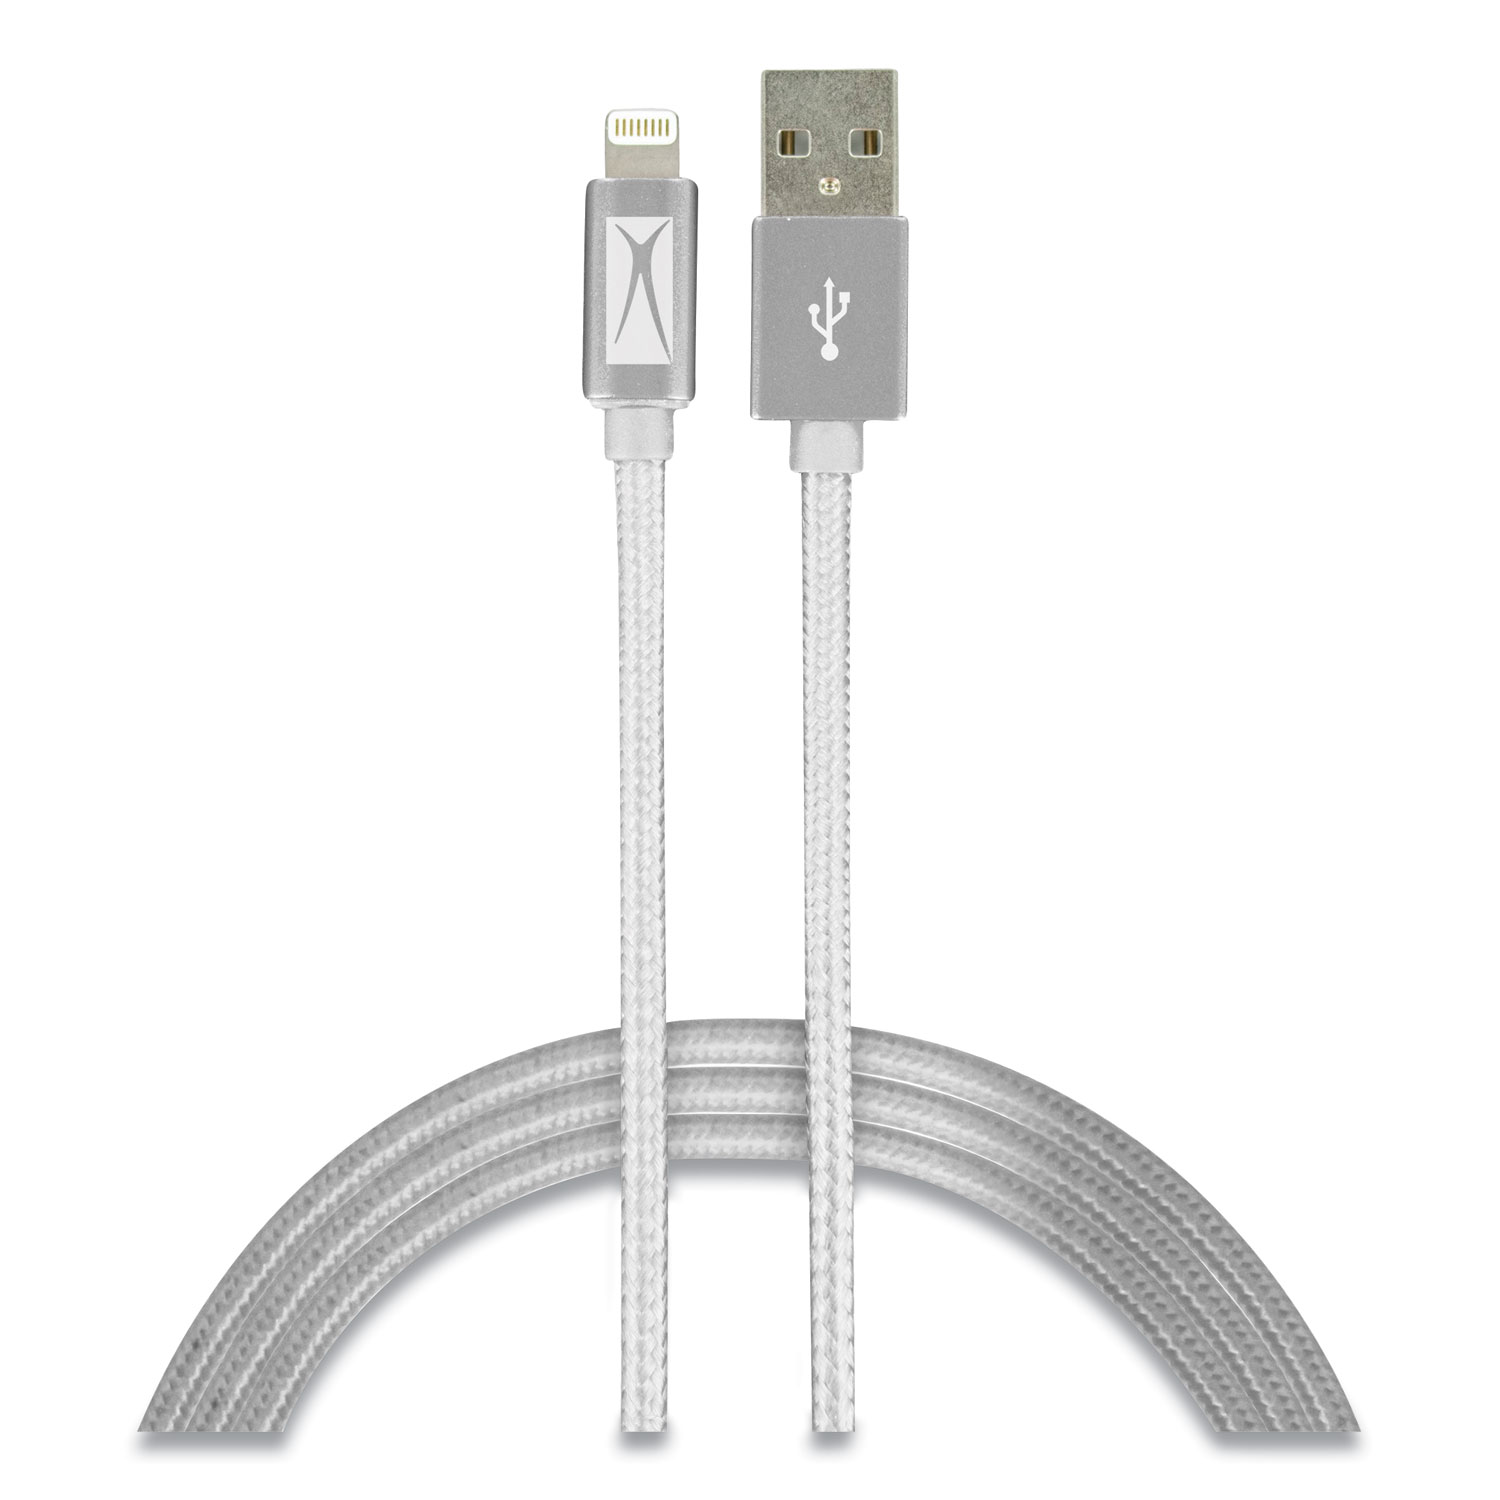  Altec Lansing AL9184 Fabric Lightning Charging Cable, 6 ft, White (ECAAL9184) 